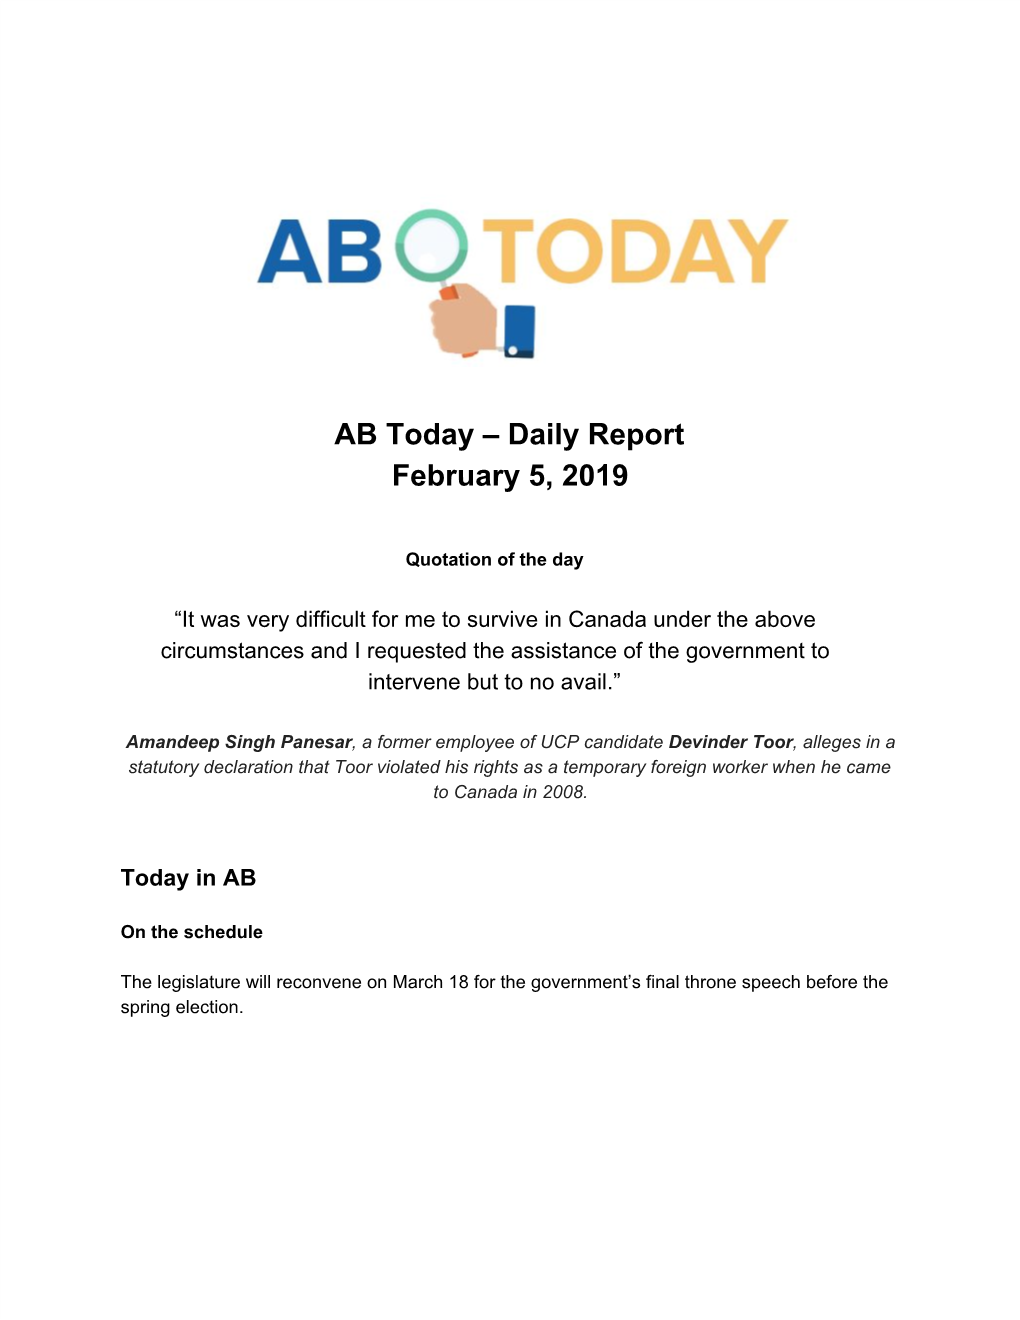 AB Today – Daily Report February 5, 2019